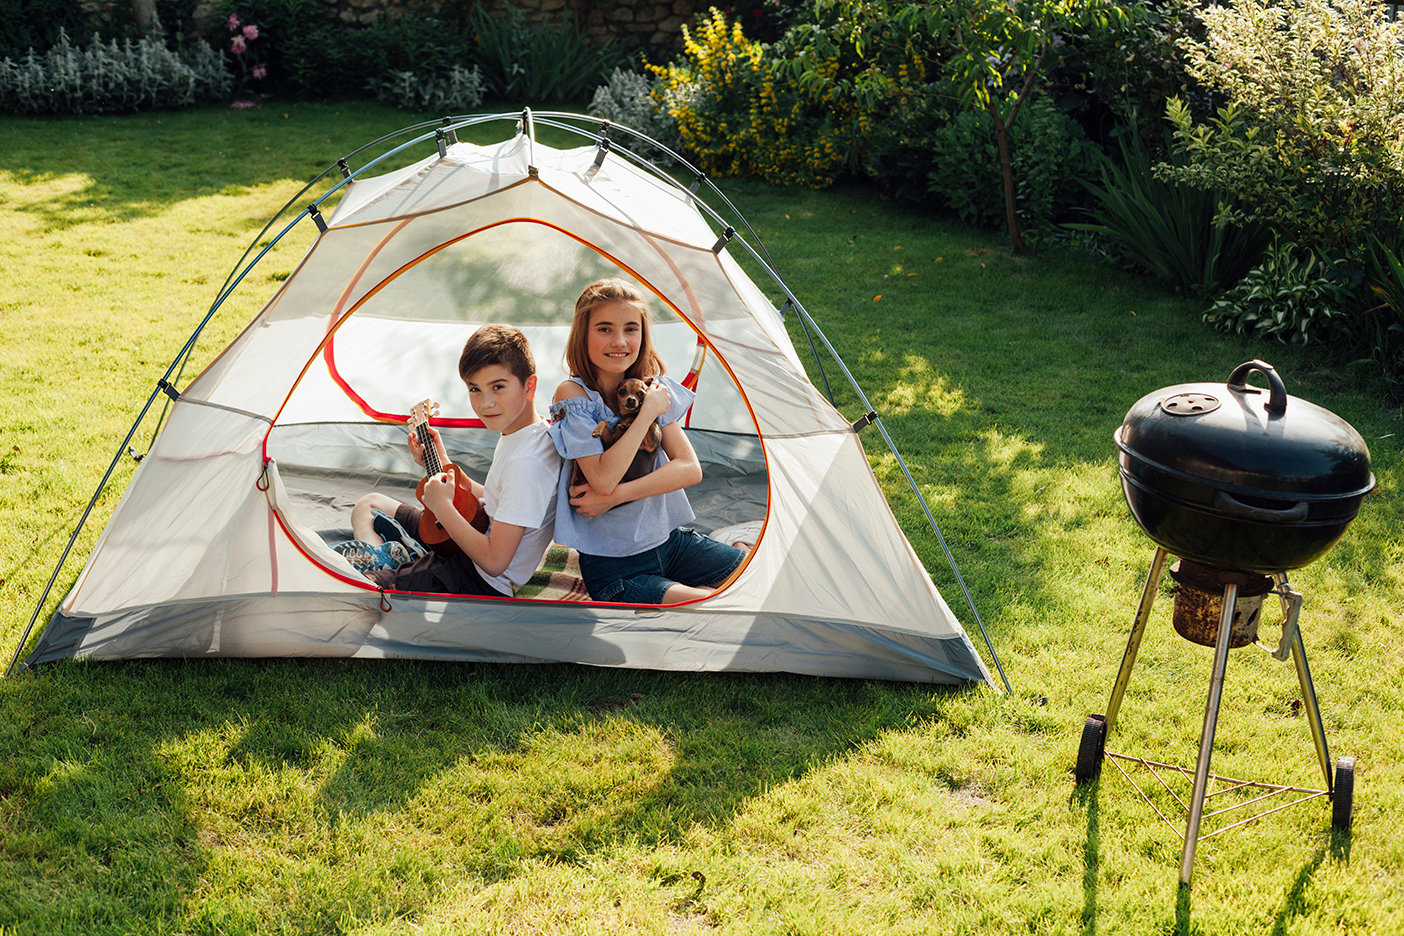 boy-playing-ukulele-sitting-back-back-his-sister-tent-near-barbecue-grill